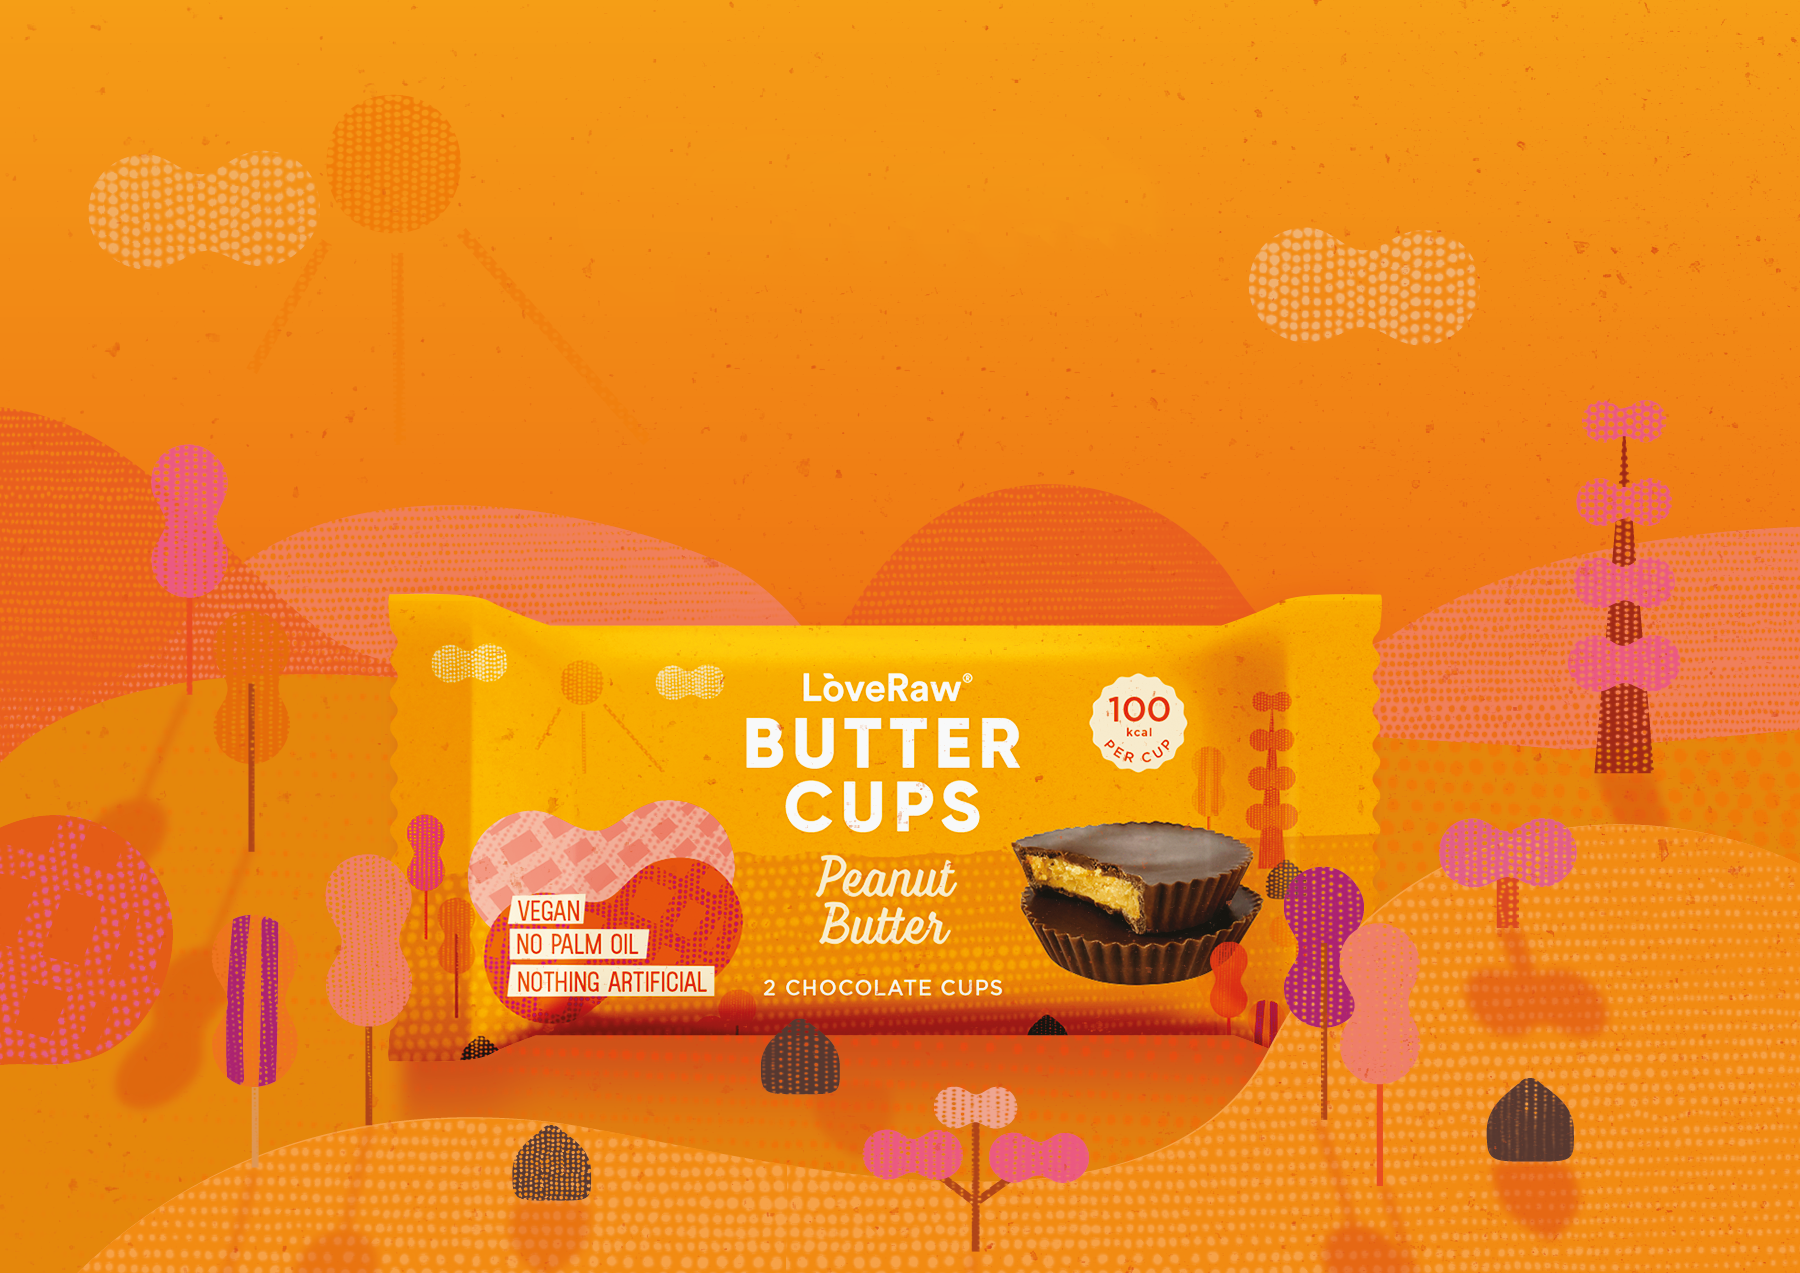 Refreshed Brand Design for Trusted LoveRaw Butter Cups